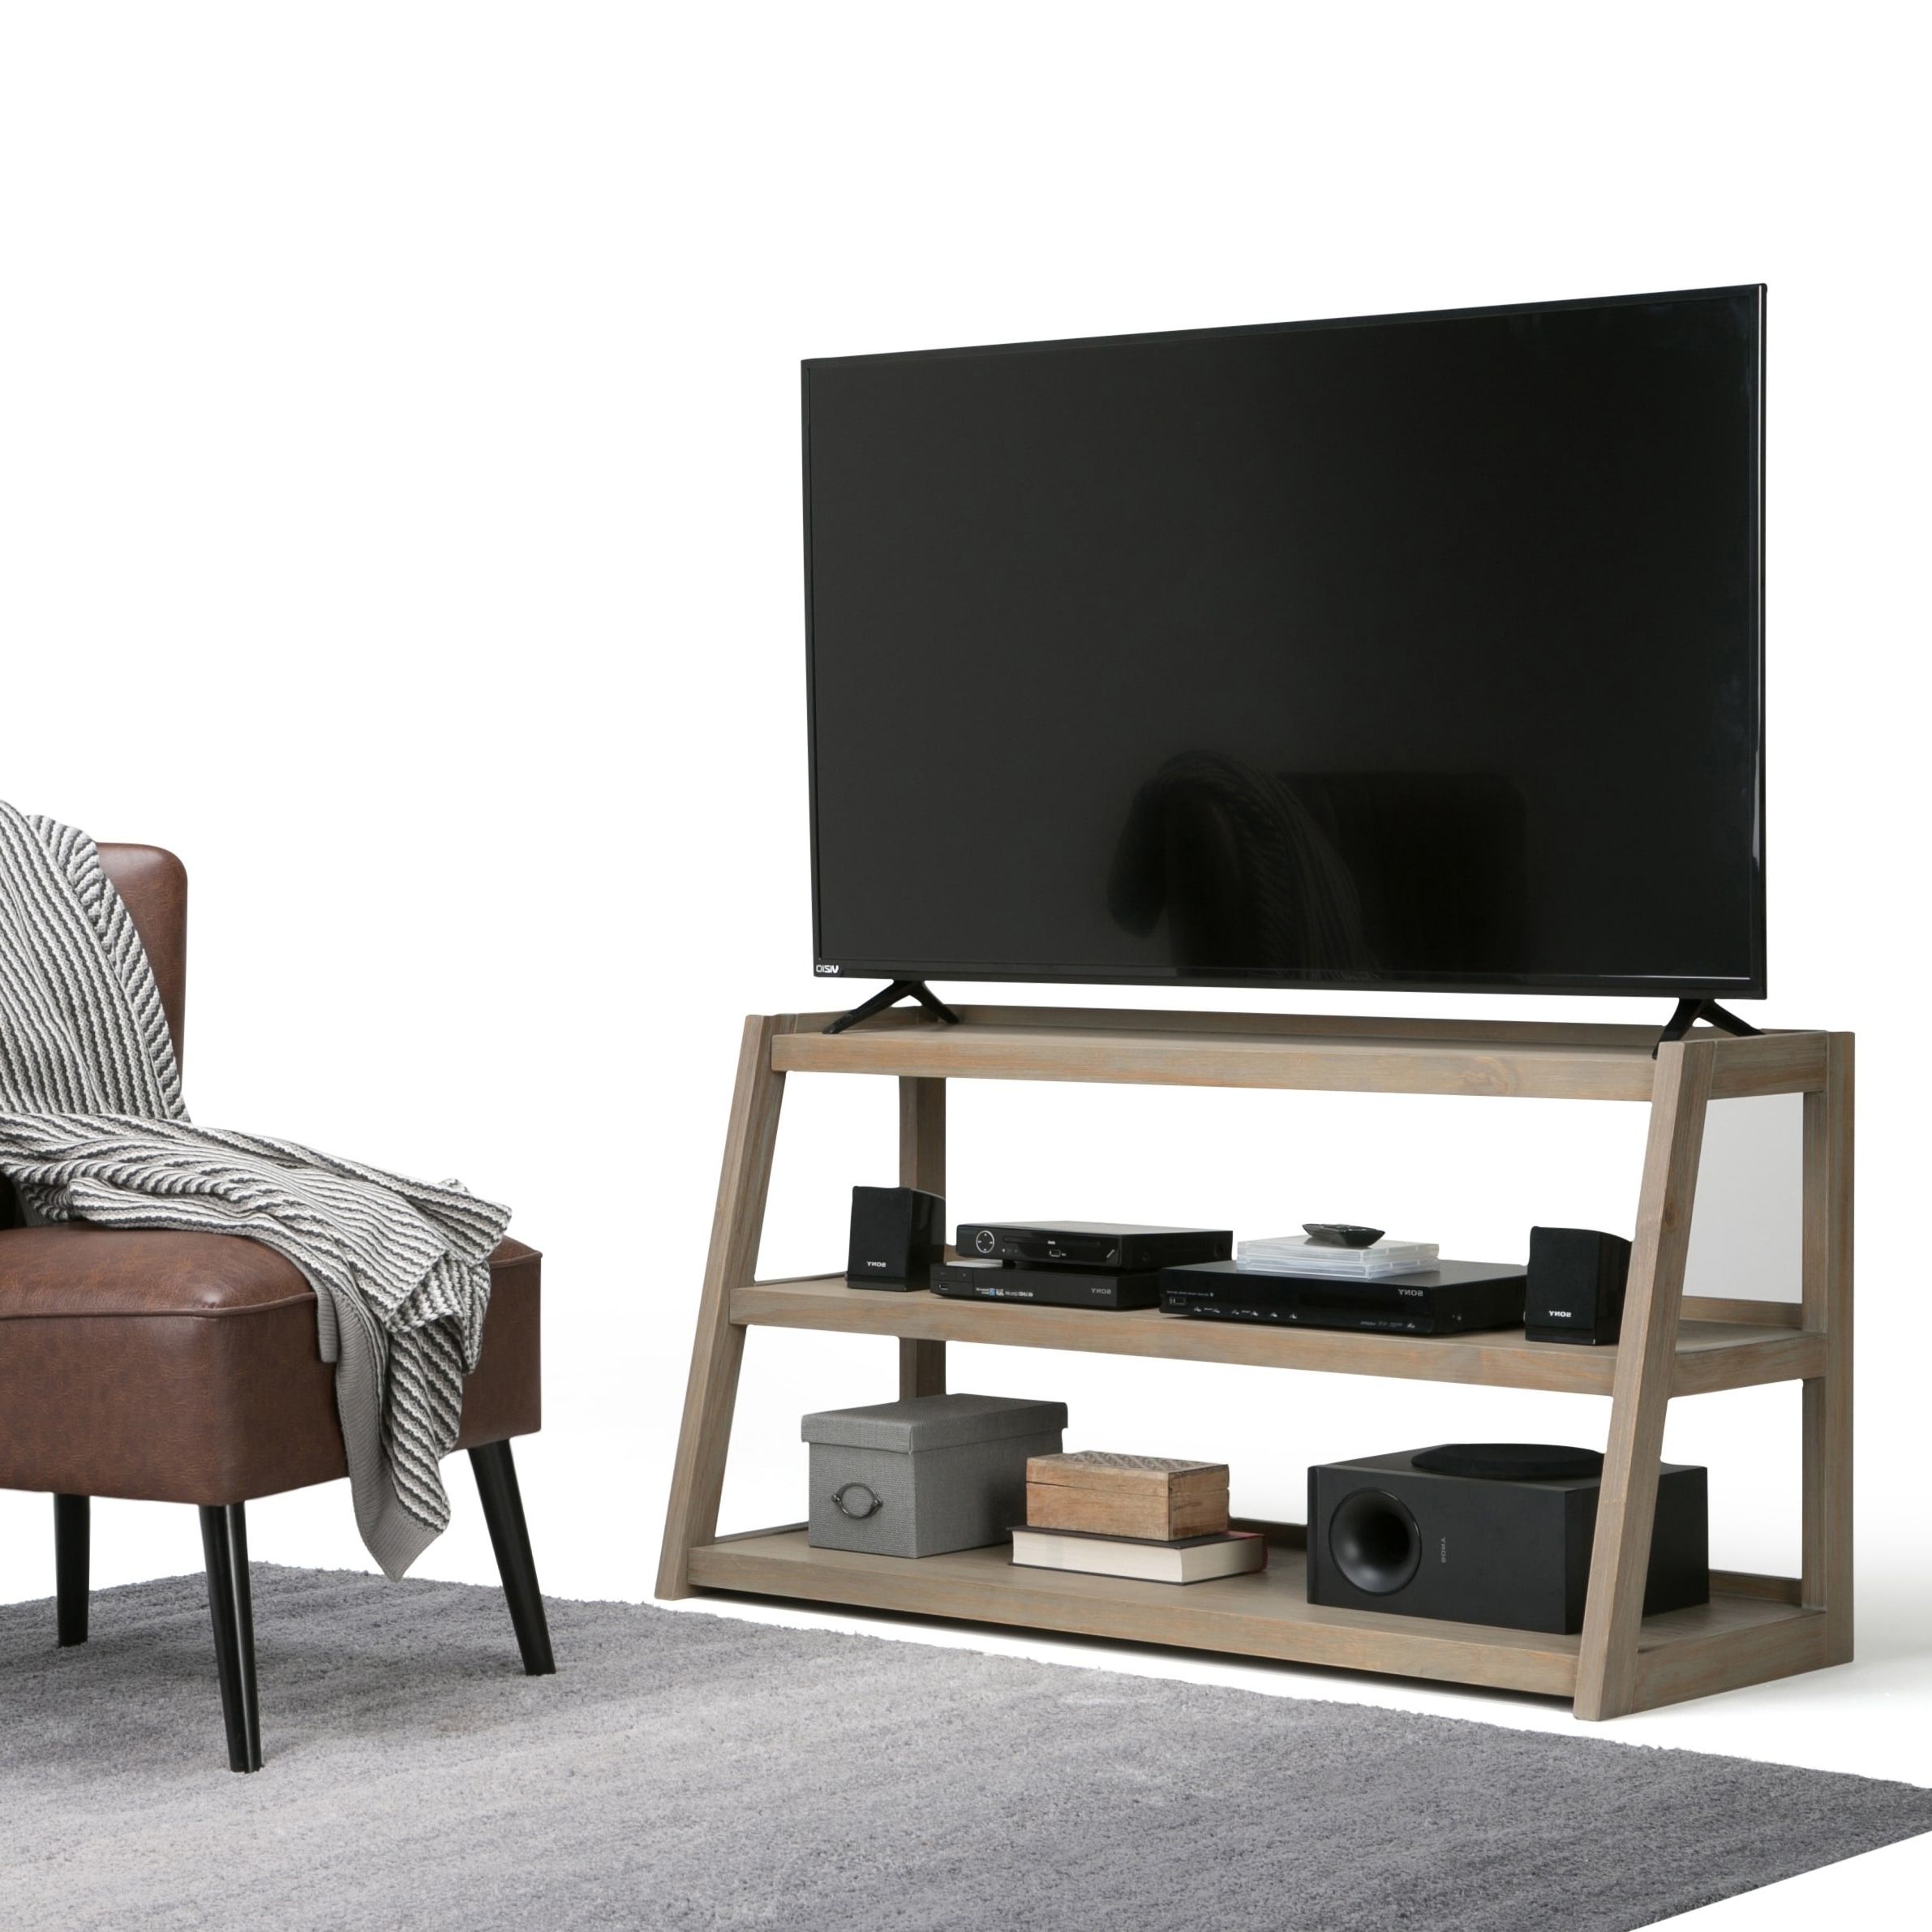 Wyndenhall Hawkins Solid Wood 48 Inch Wide Modern With Antea Tv Stands For Tvs Up To 48" (View 18 of 20)